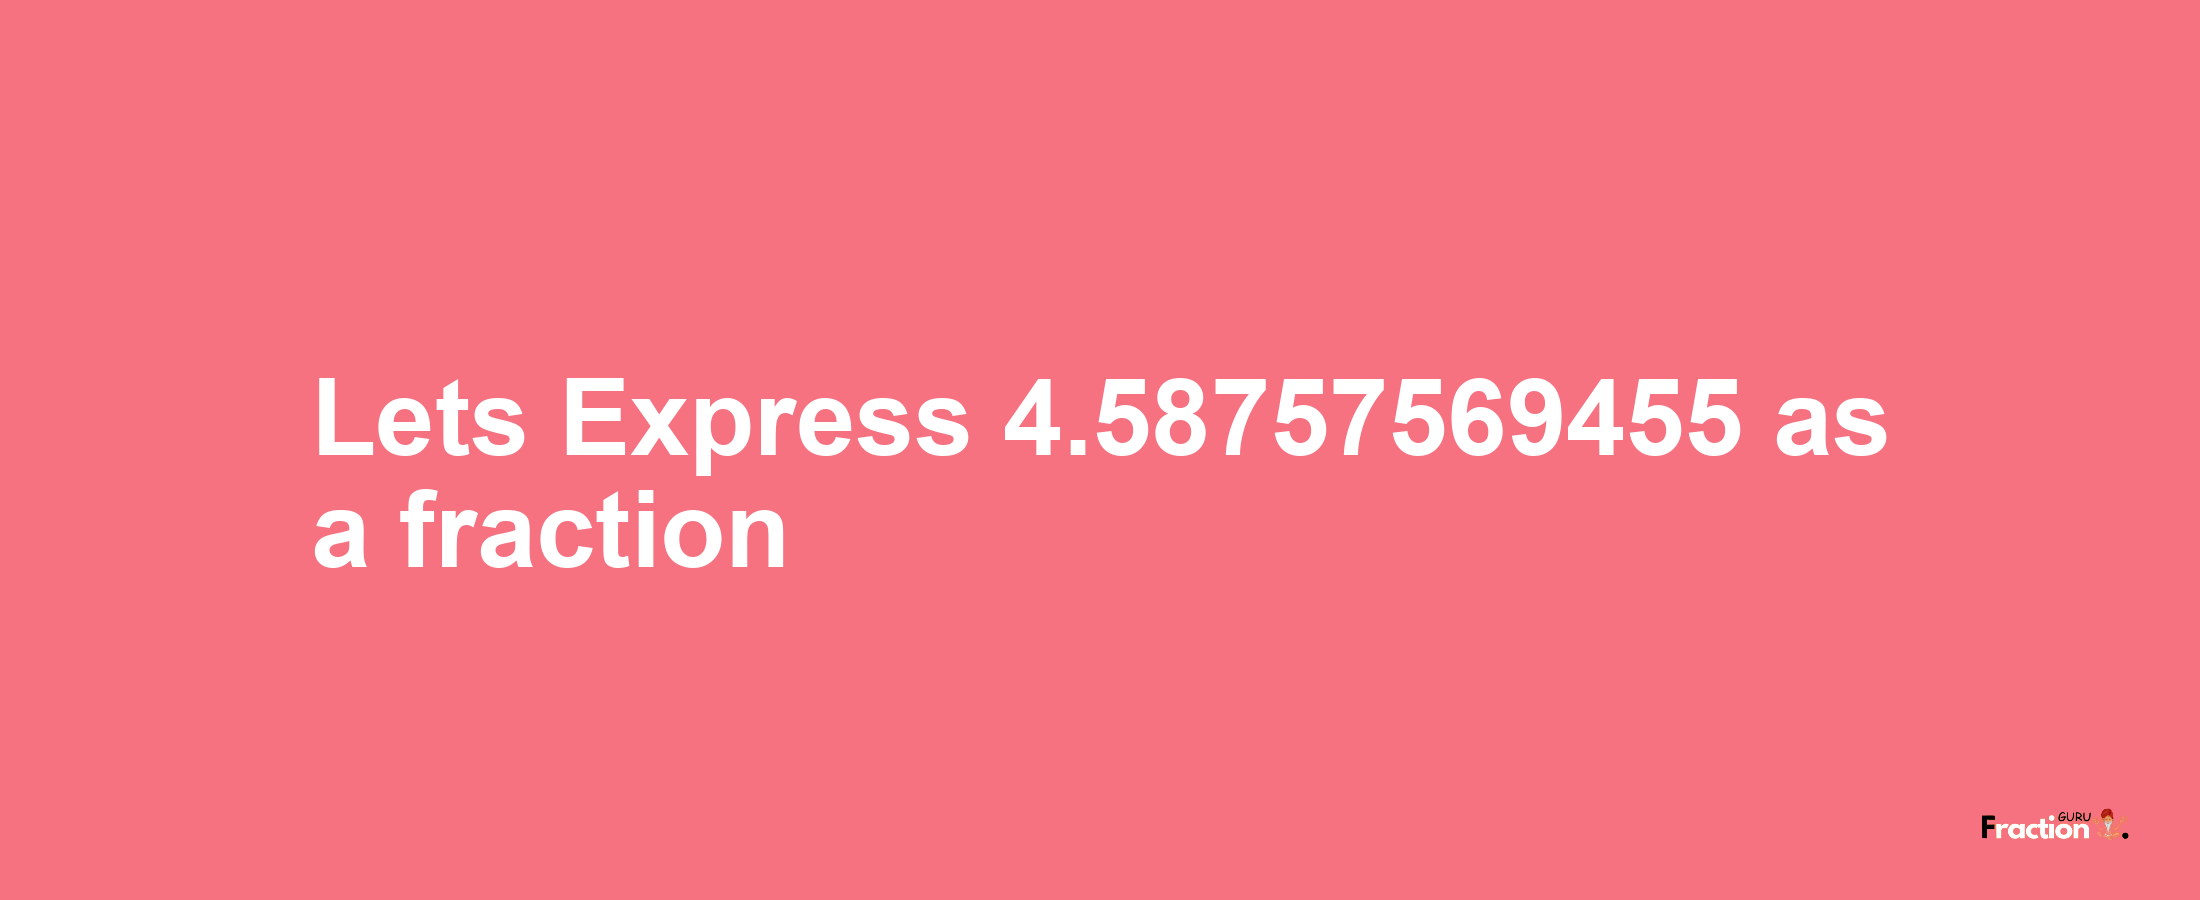 Lets Express 4.58757569455 as afraction